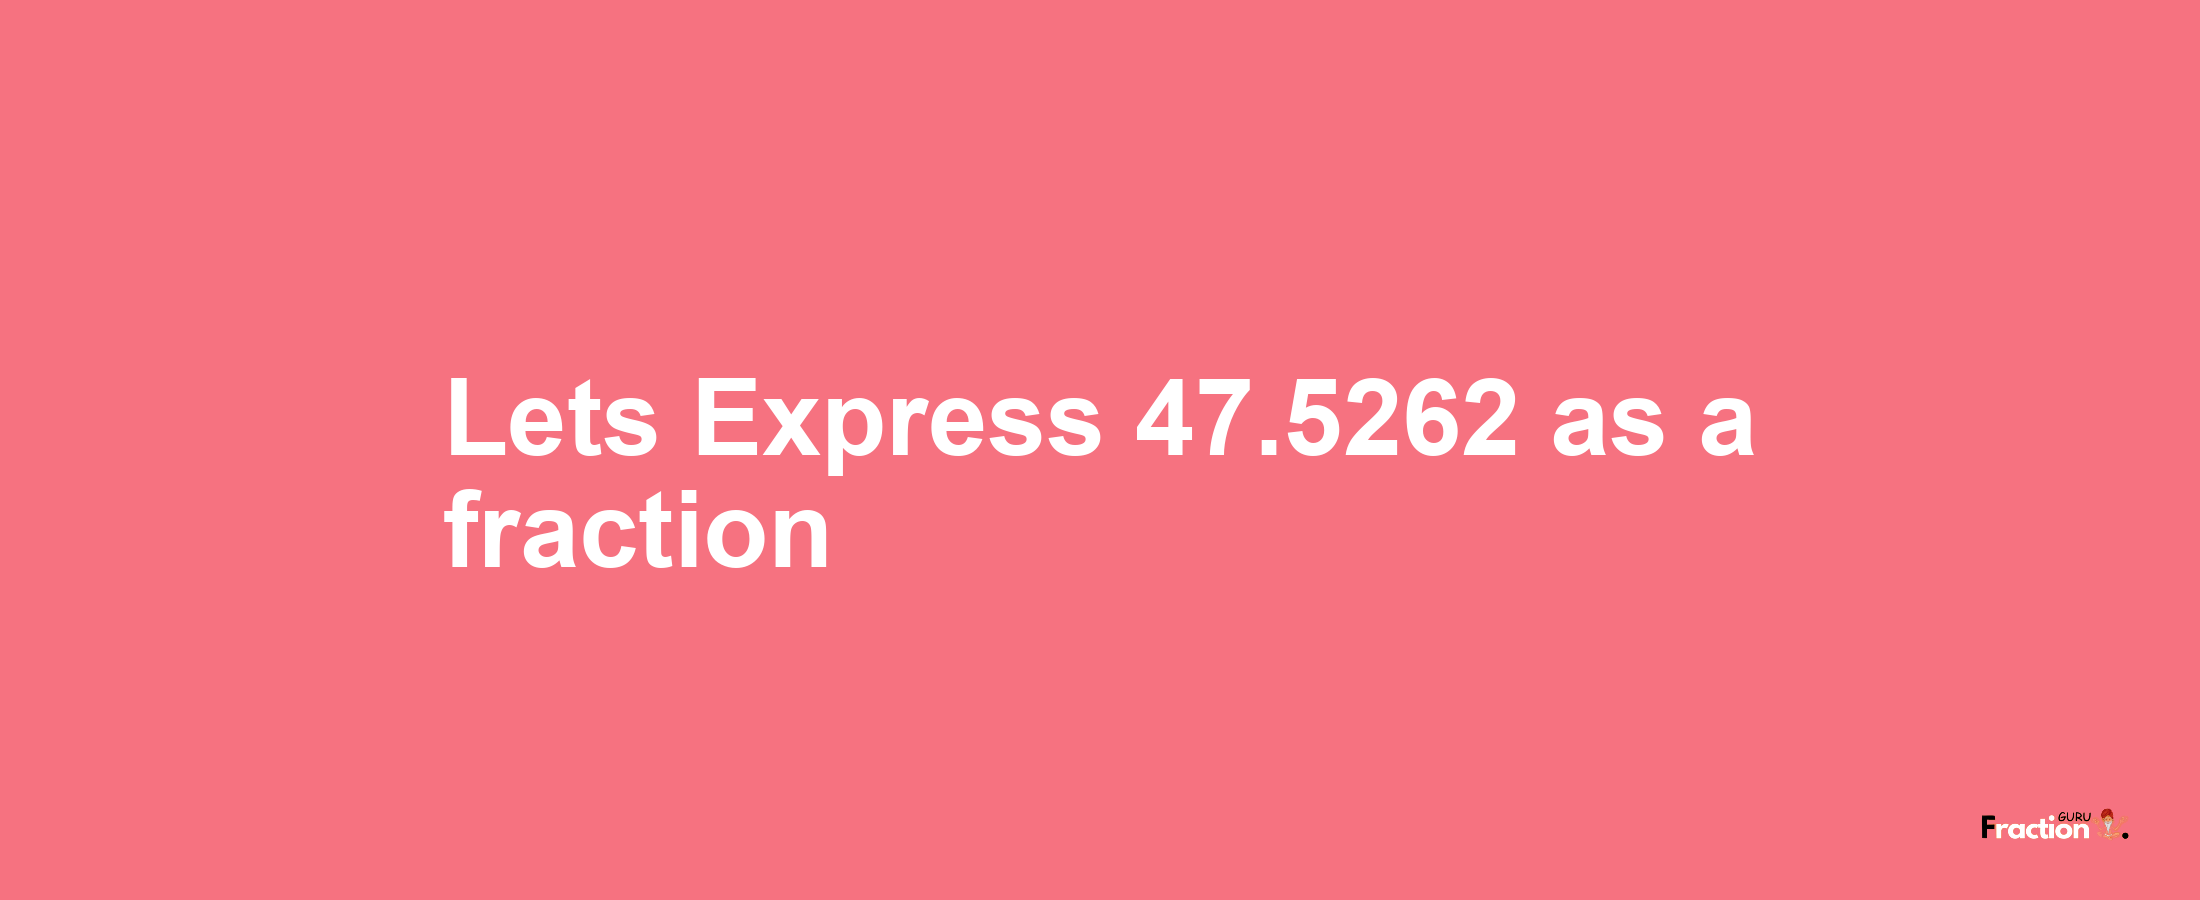 Lets Express 47.5262 as afraction